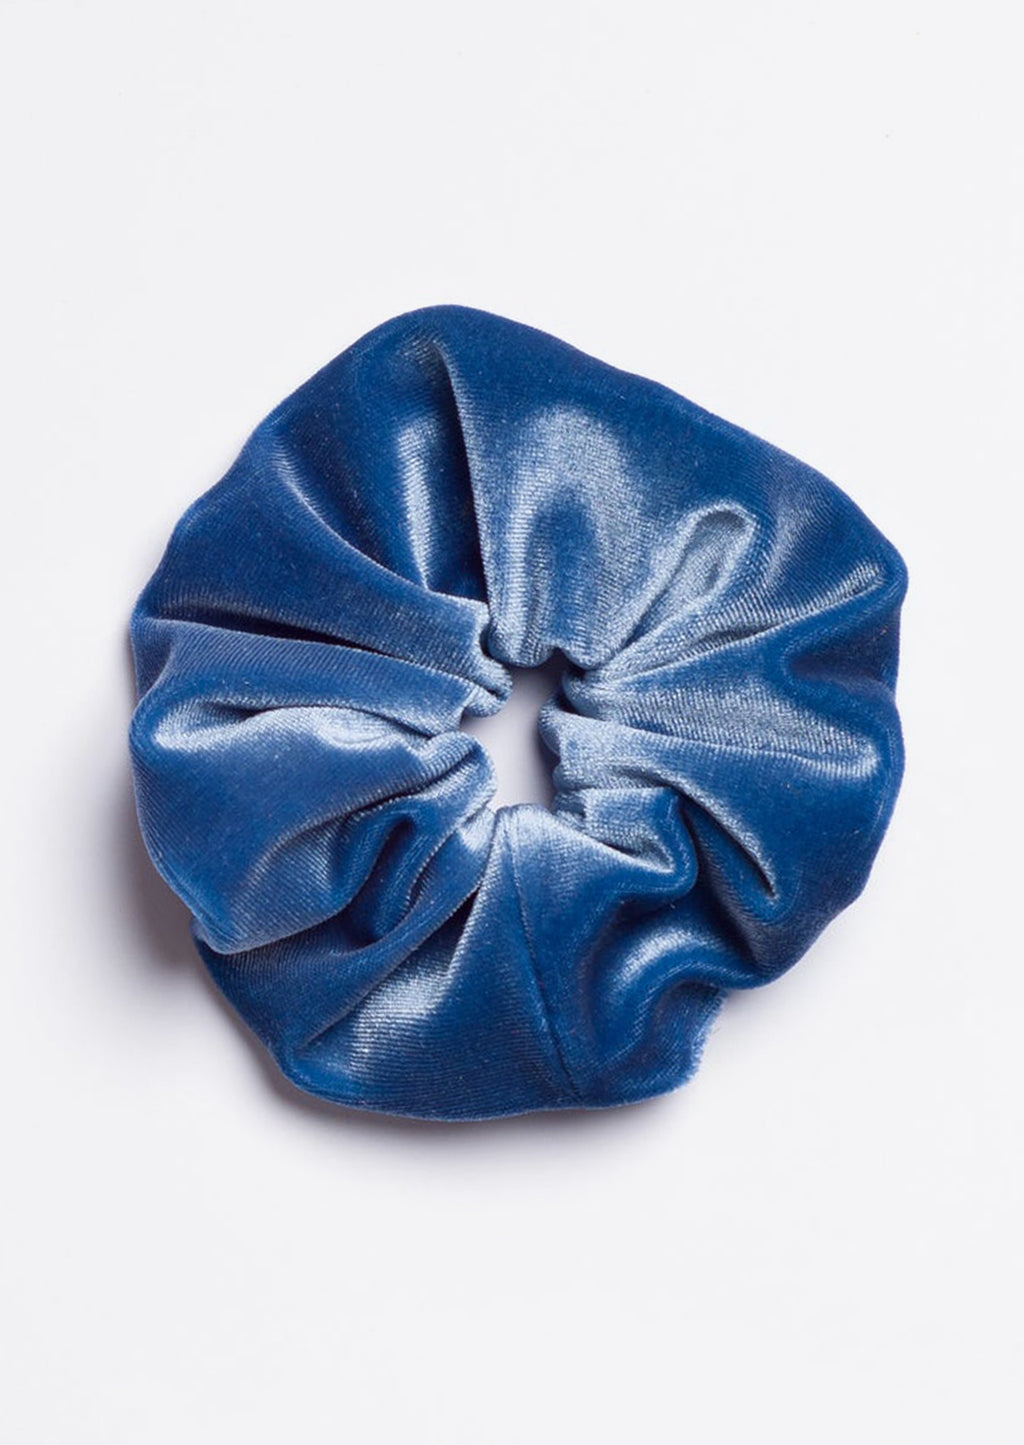 Forget Me Not: A velvet scrunchie in forget me not blue.